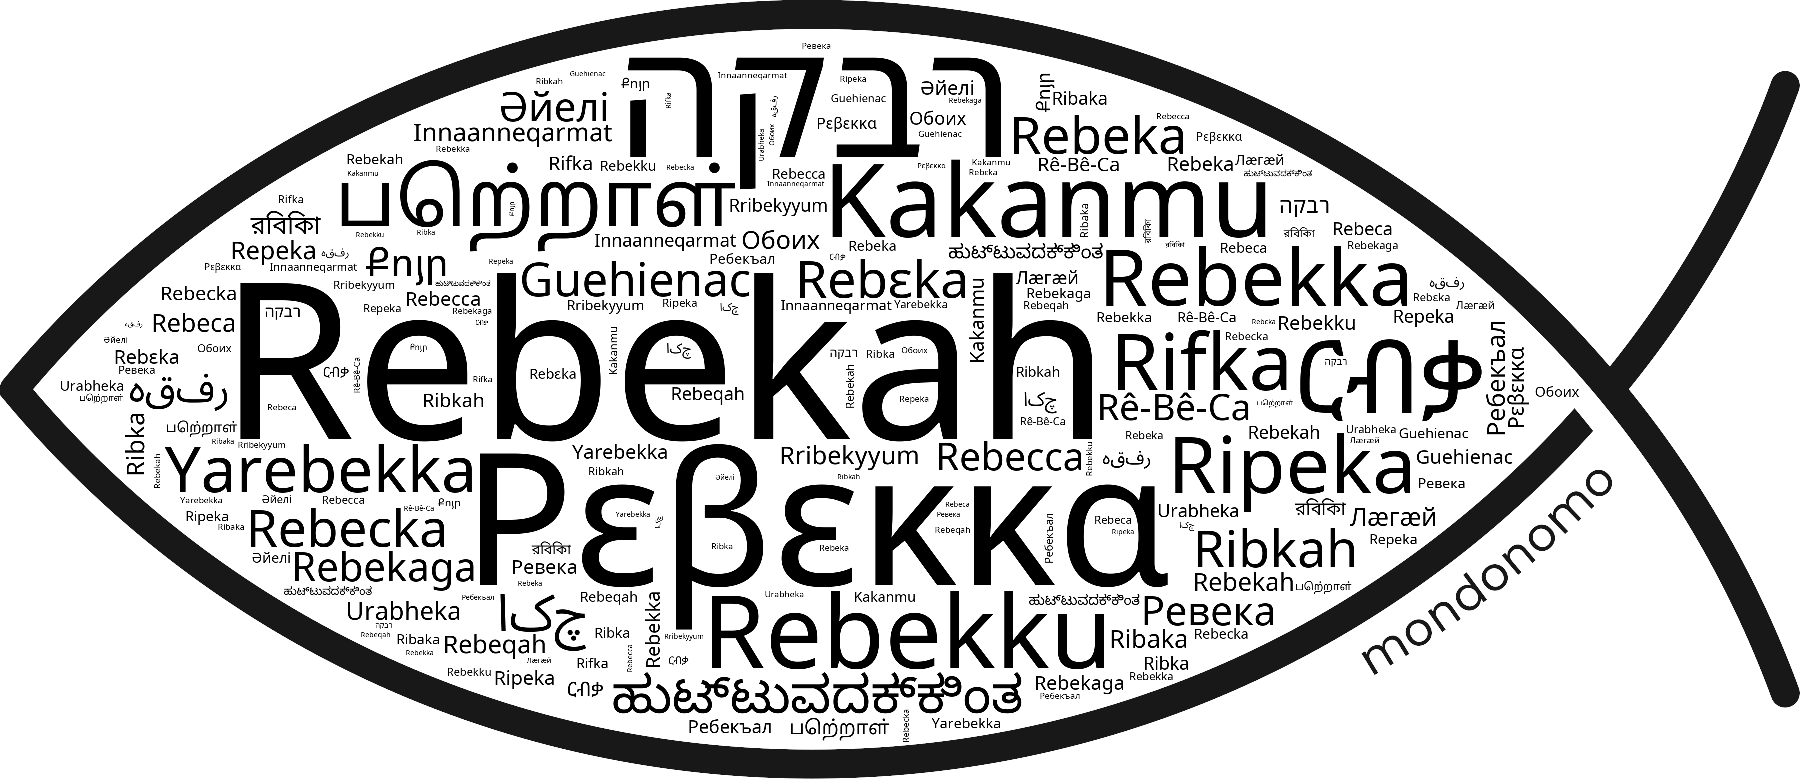 Name Rebekah in the world's Bibles